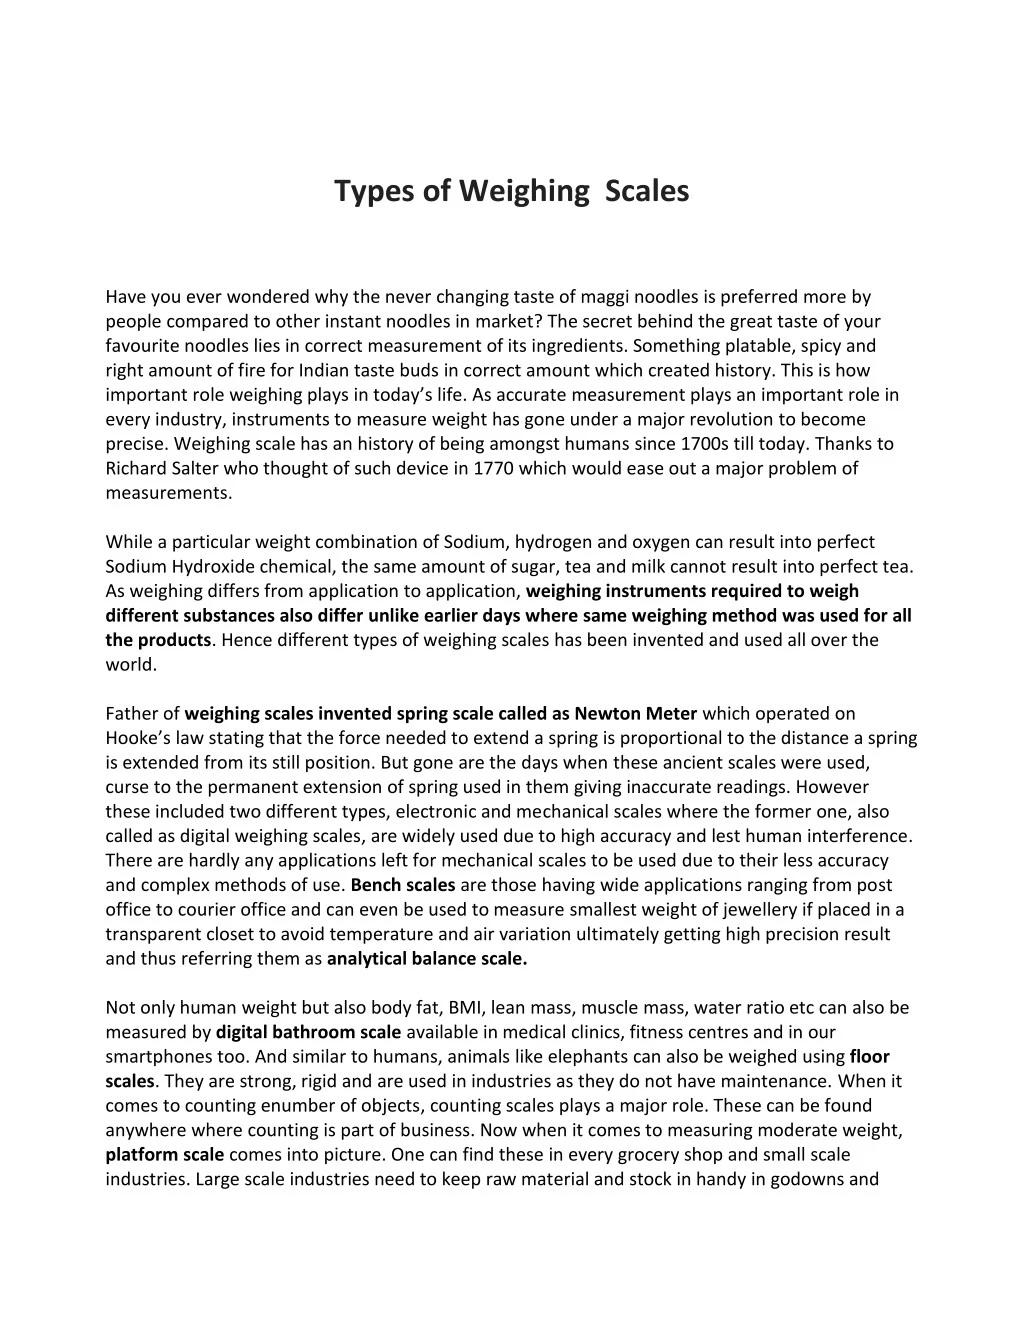 types of weighing scales